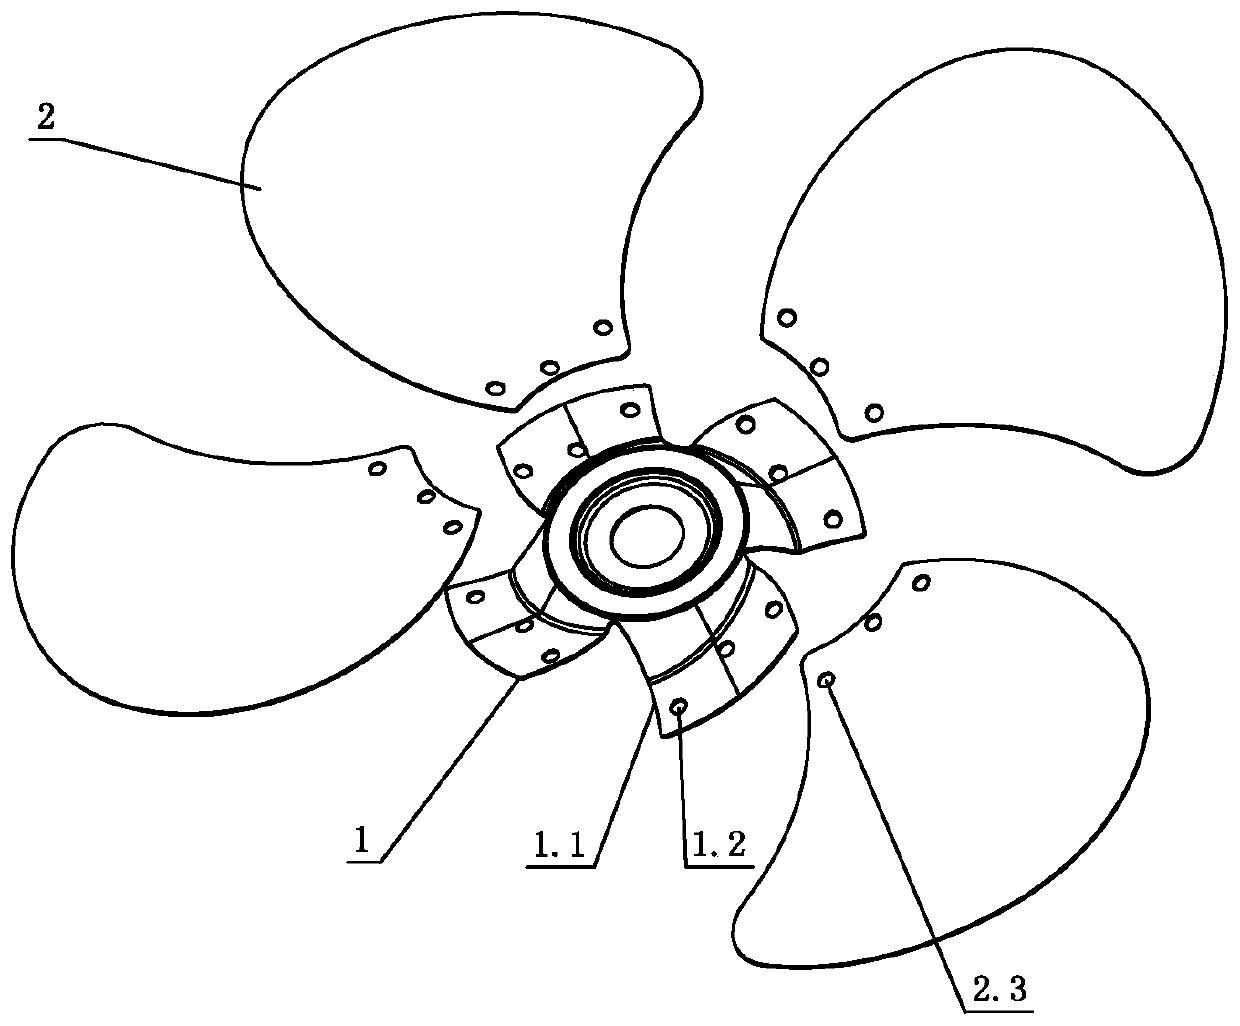 A commercial electric fan blade